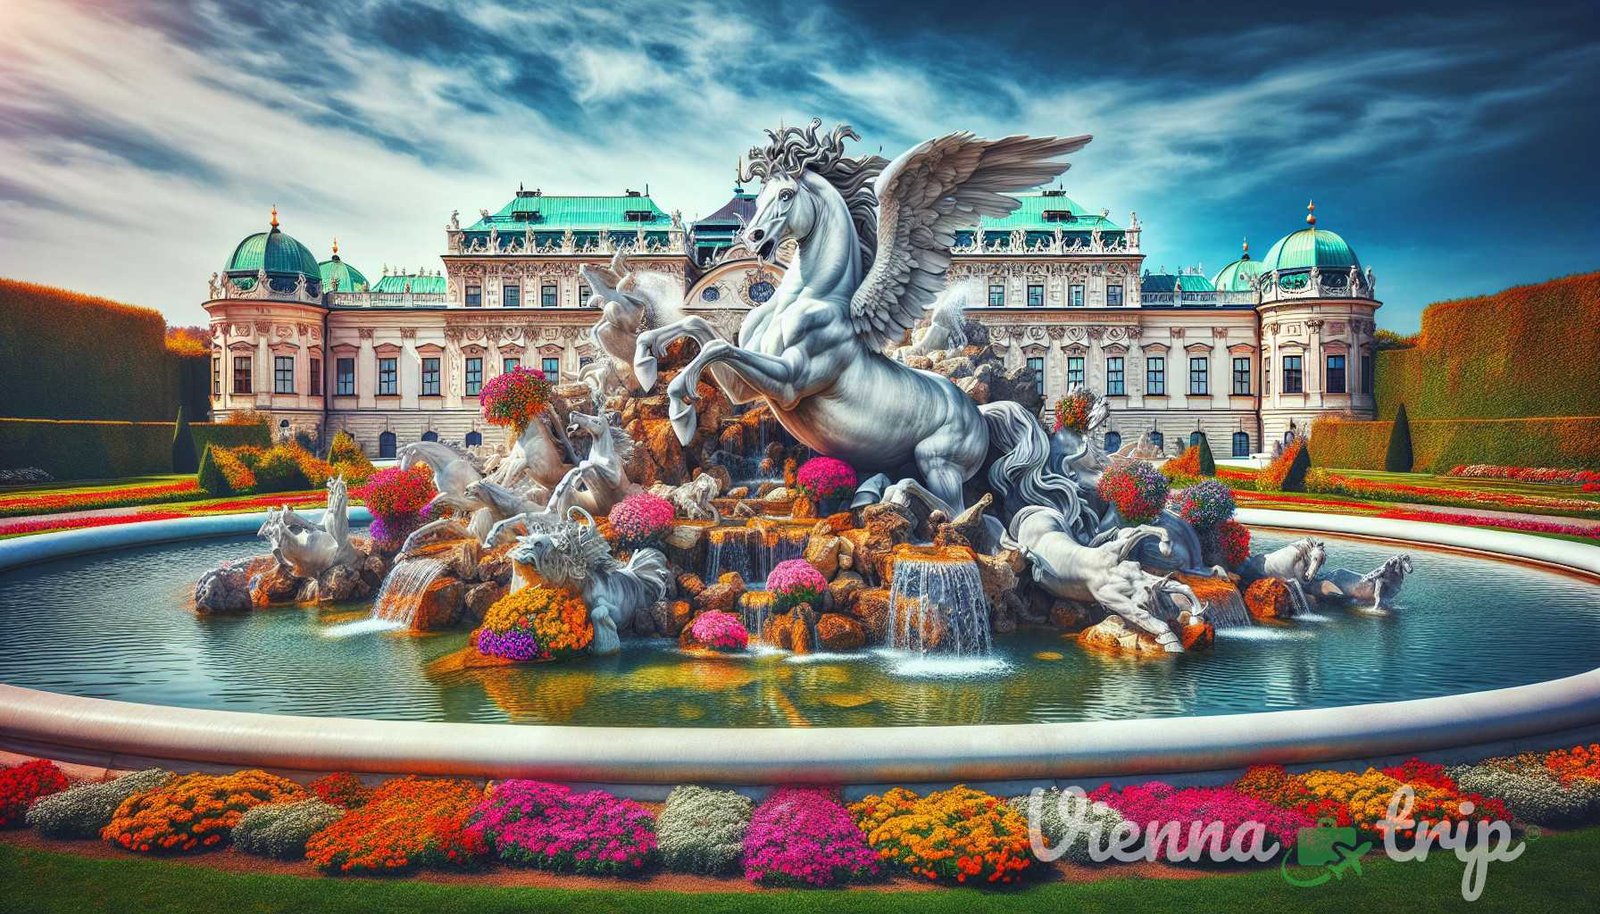 Illustration for section: One of the most iconic elements of the Belvedere gardens is the Pegasus Fountain. This magnificent s - belvedere secrets